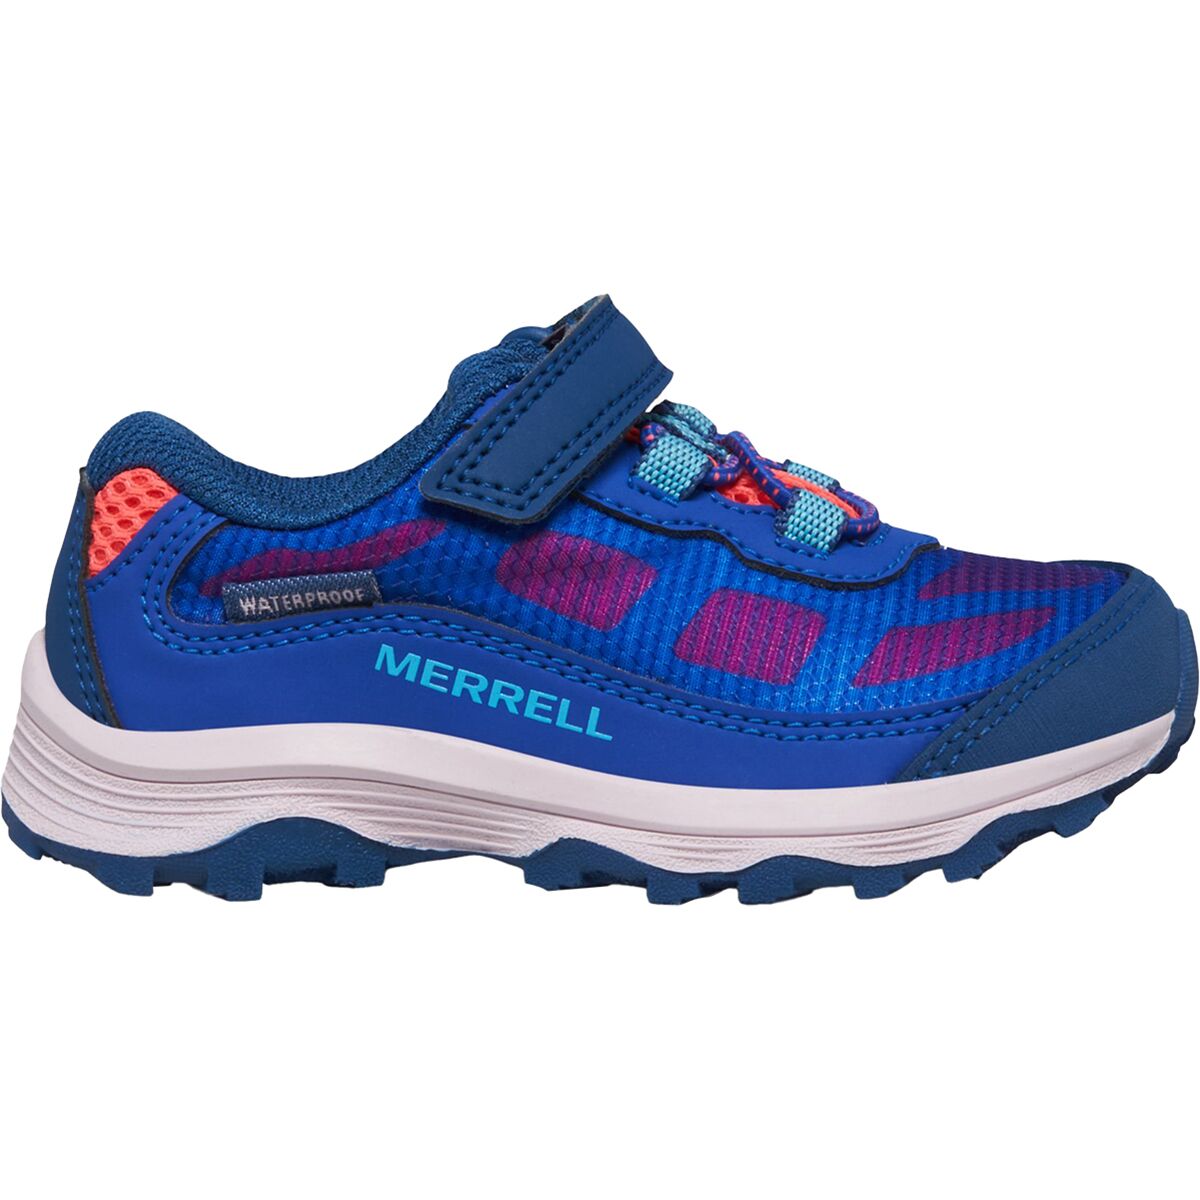 Merrell Moab Speed Low A/C Waterproof Shoe - Toddlers'